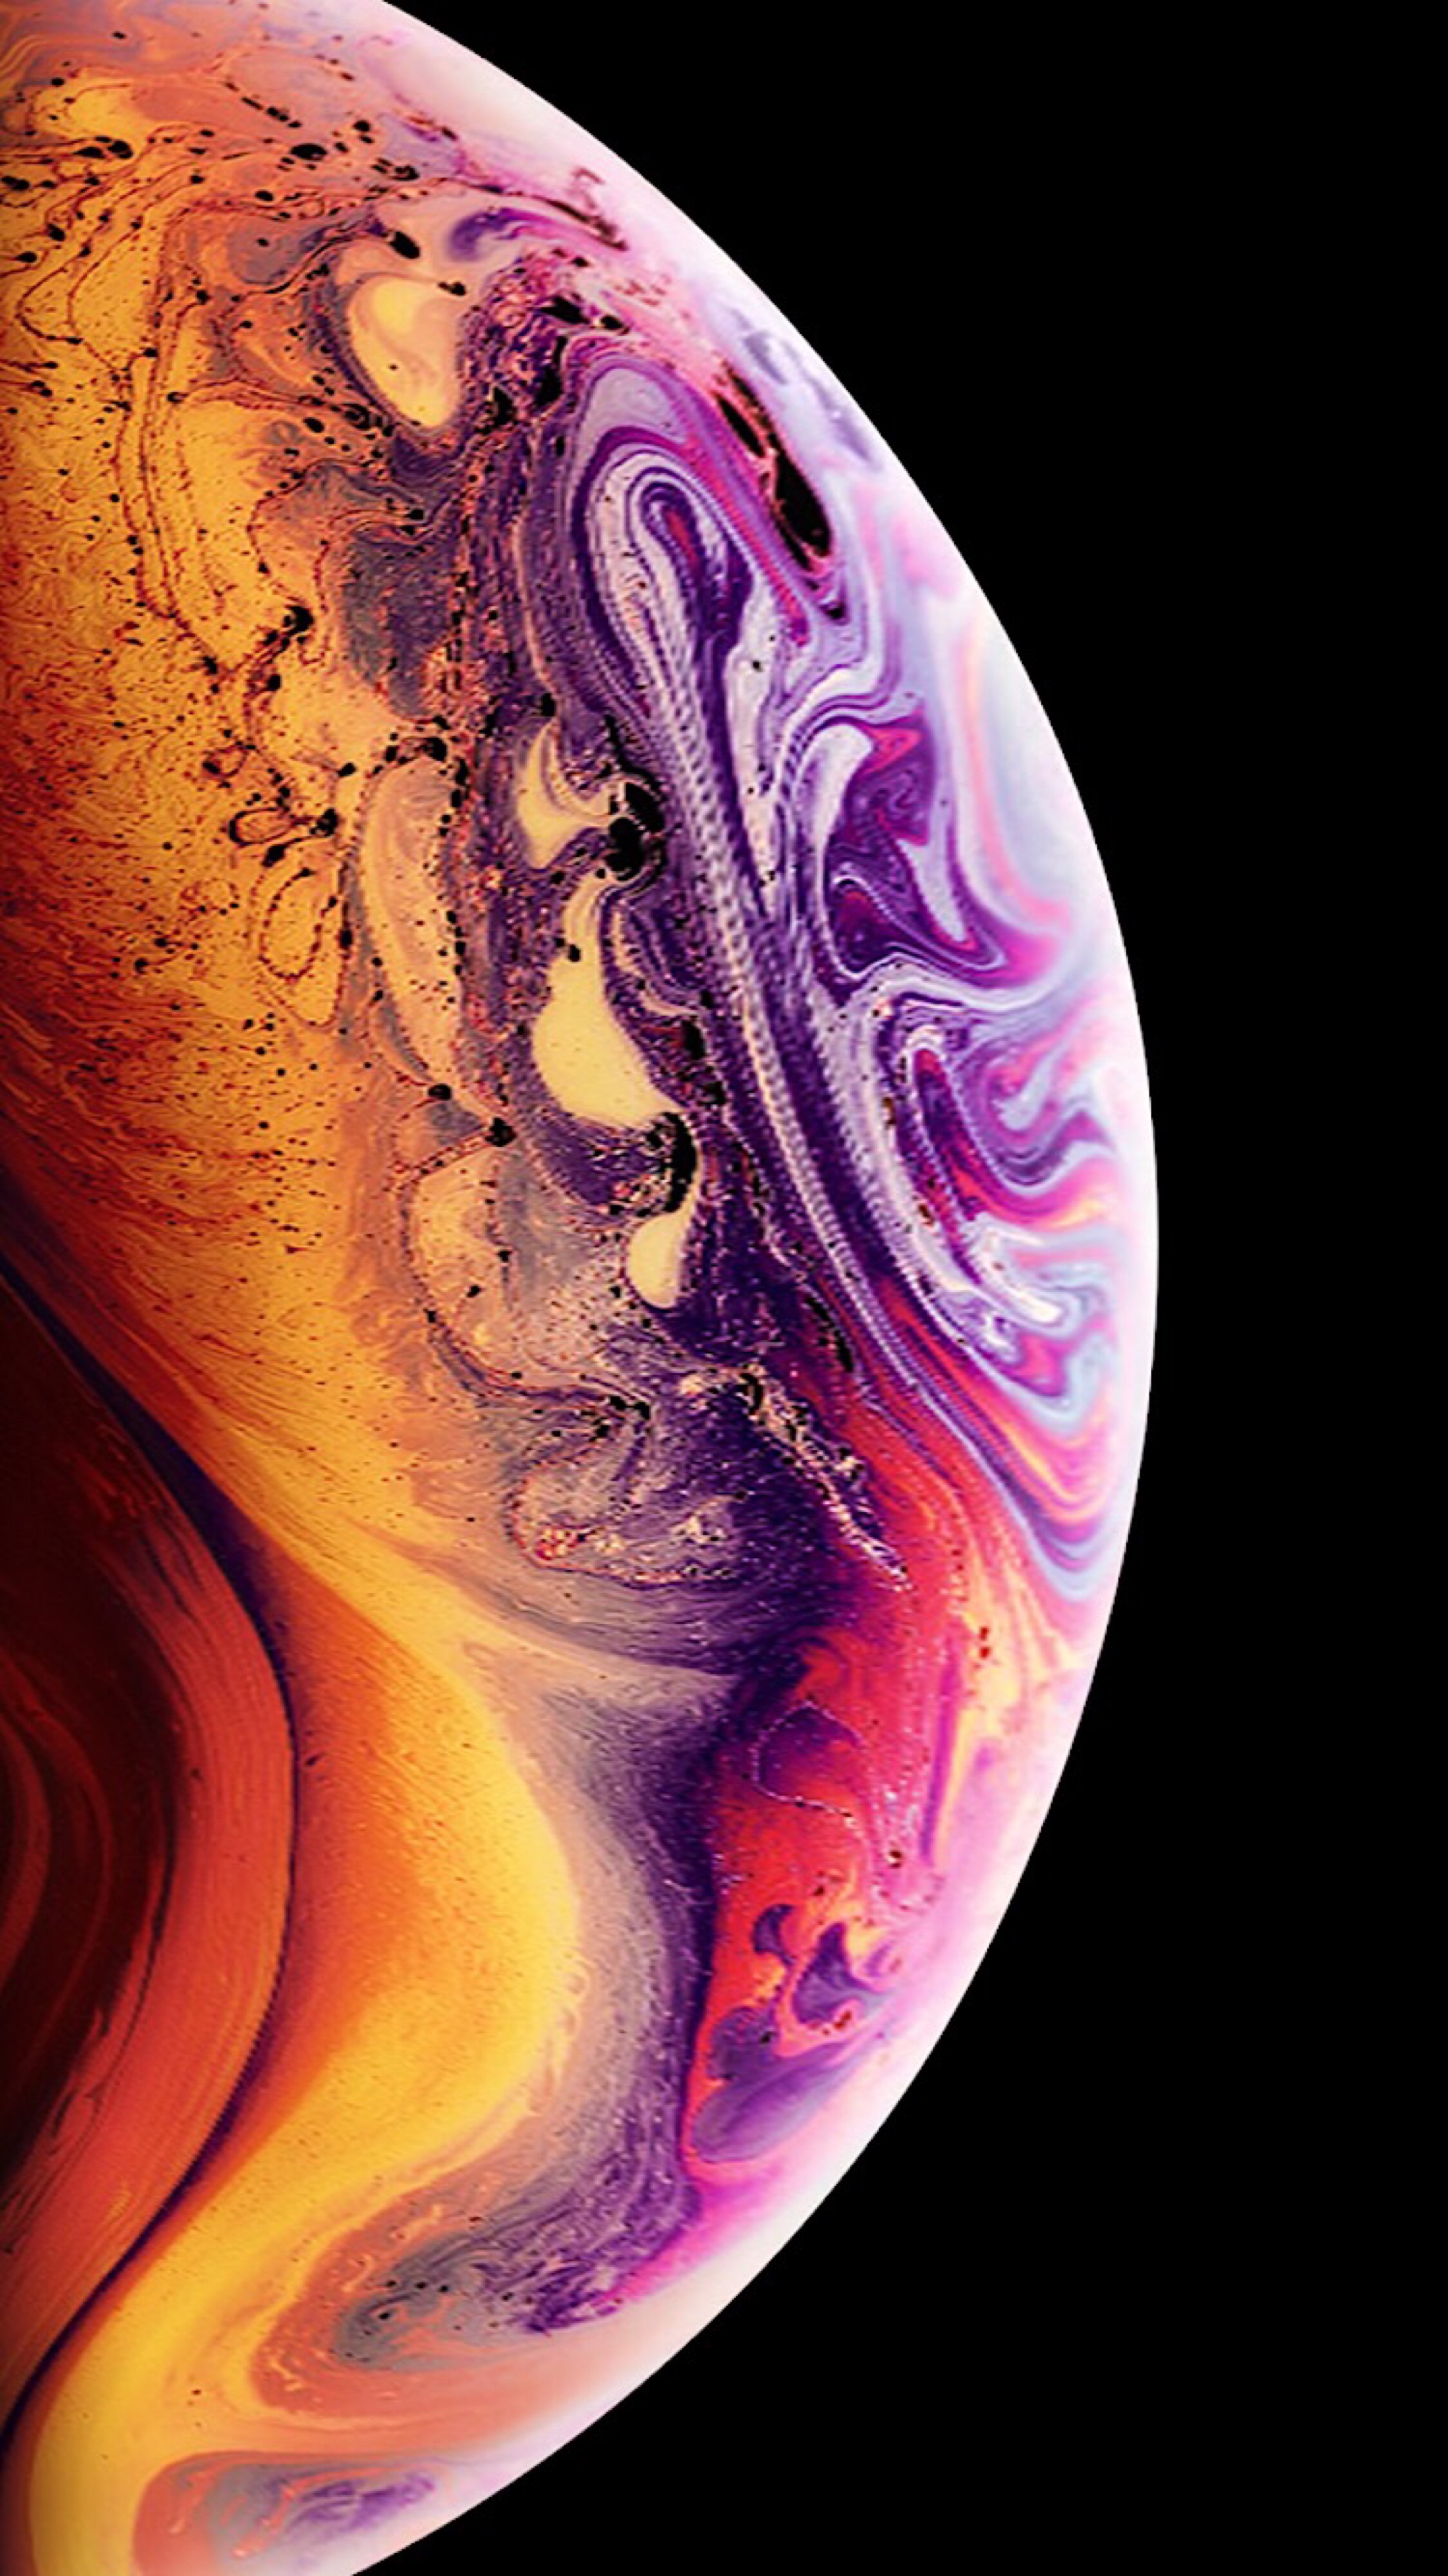 iPhone_XS_wallpaper-for-standard_iphone - iPhone 6, 7, or 8